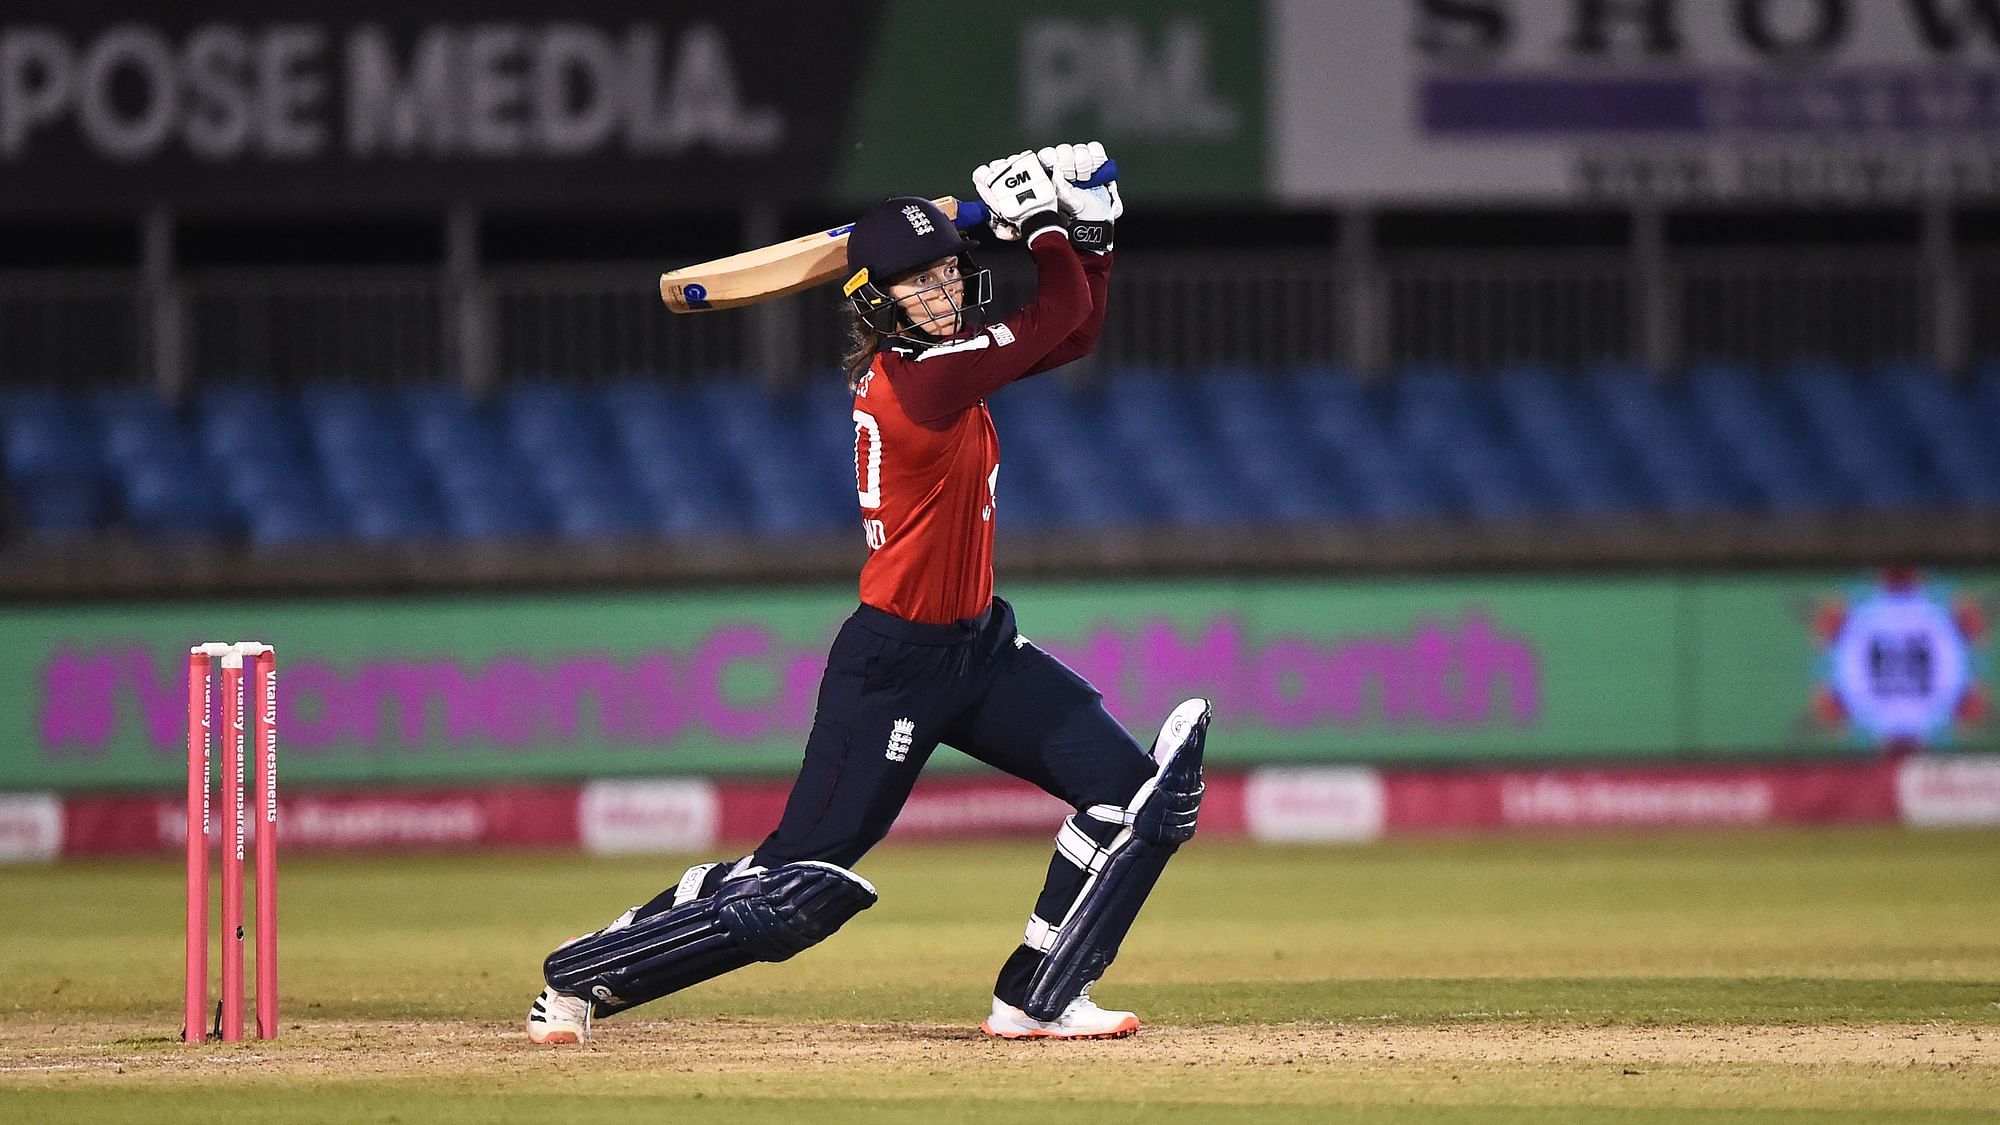 England’s Amy Jones came in in the ninth over and stayed till the last over, to take her side’s score to 166, amassing 55 runs off 37 balls.